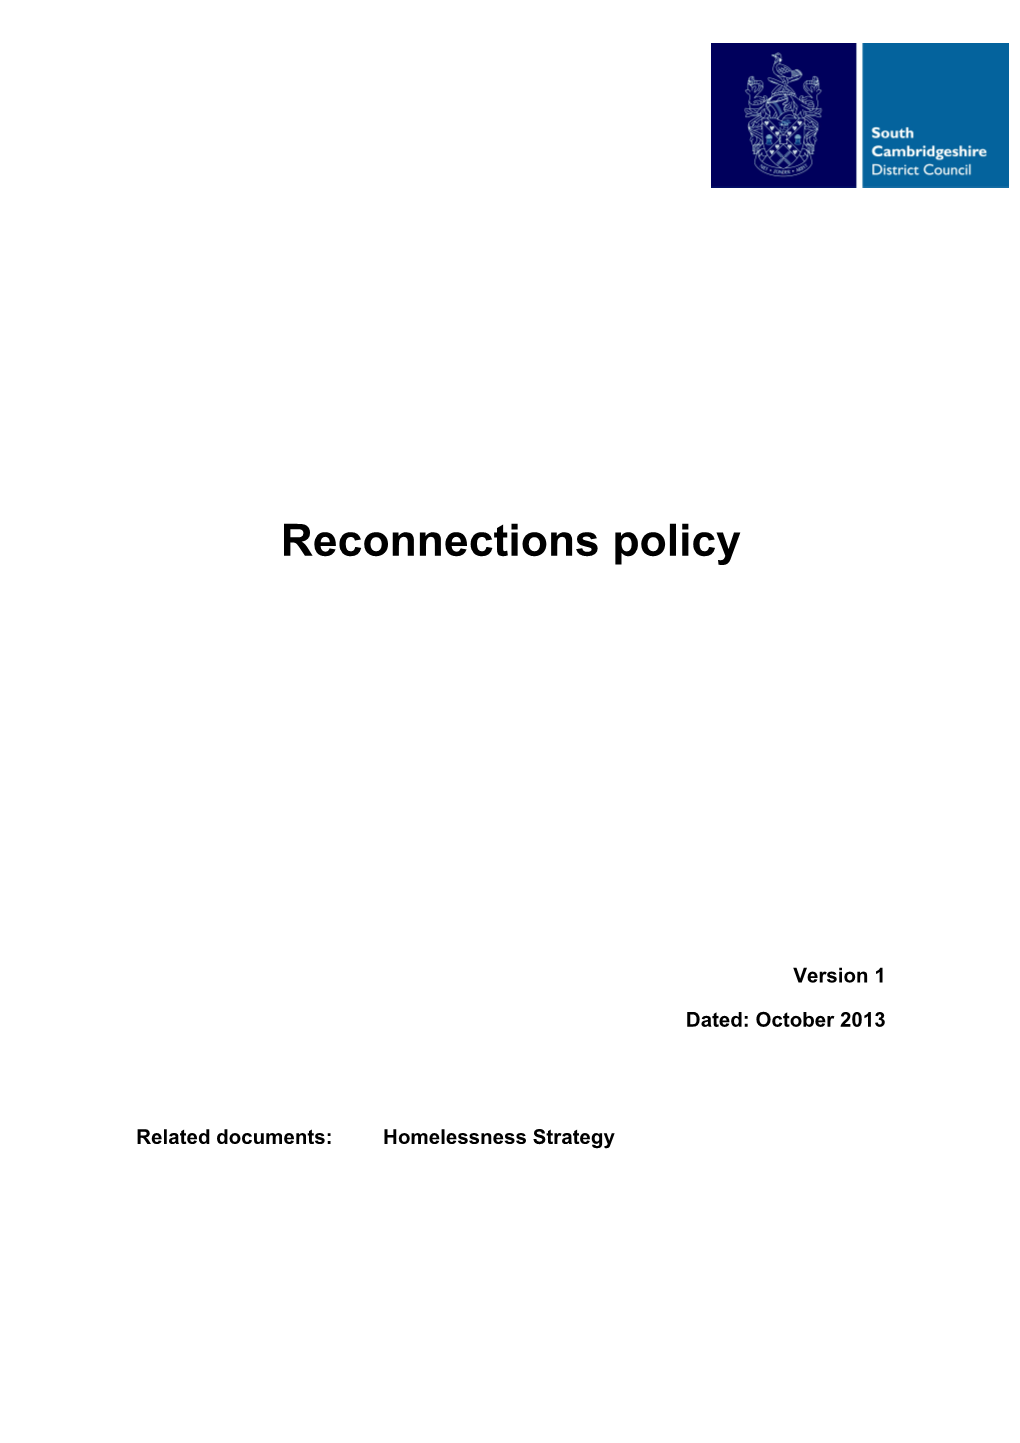 Reconnections Policy